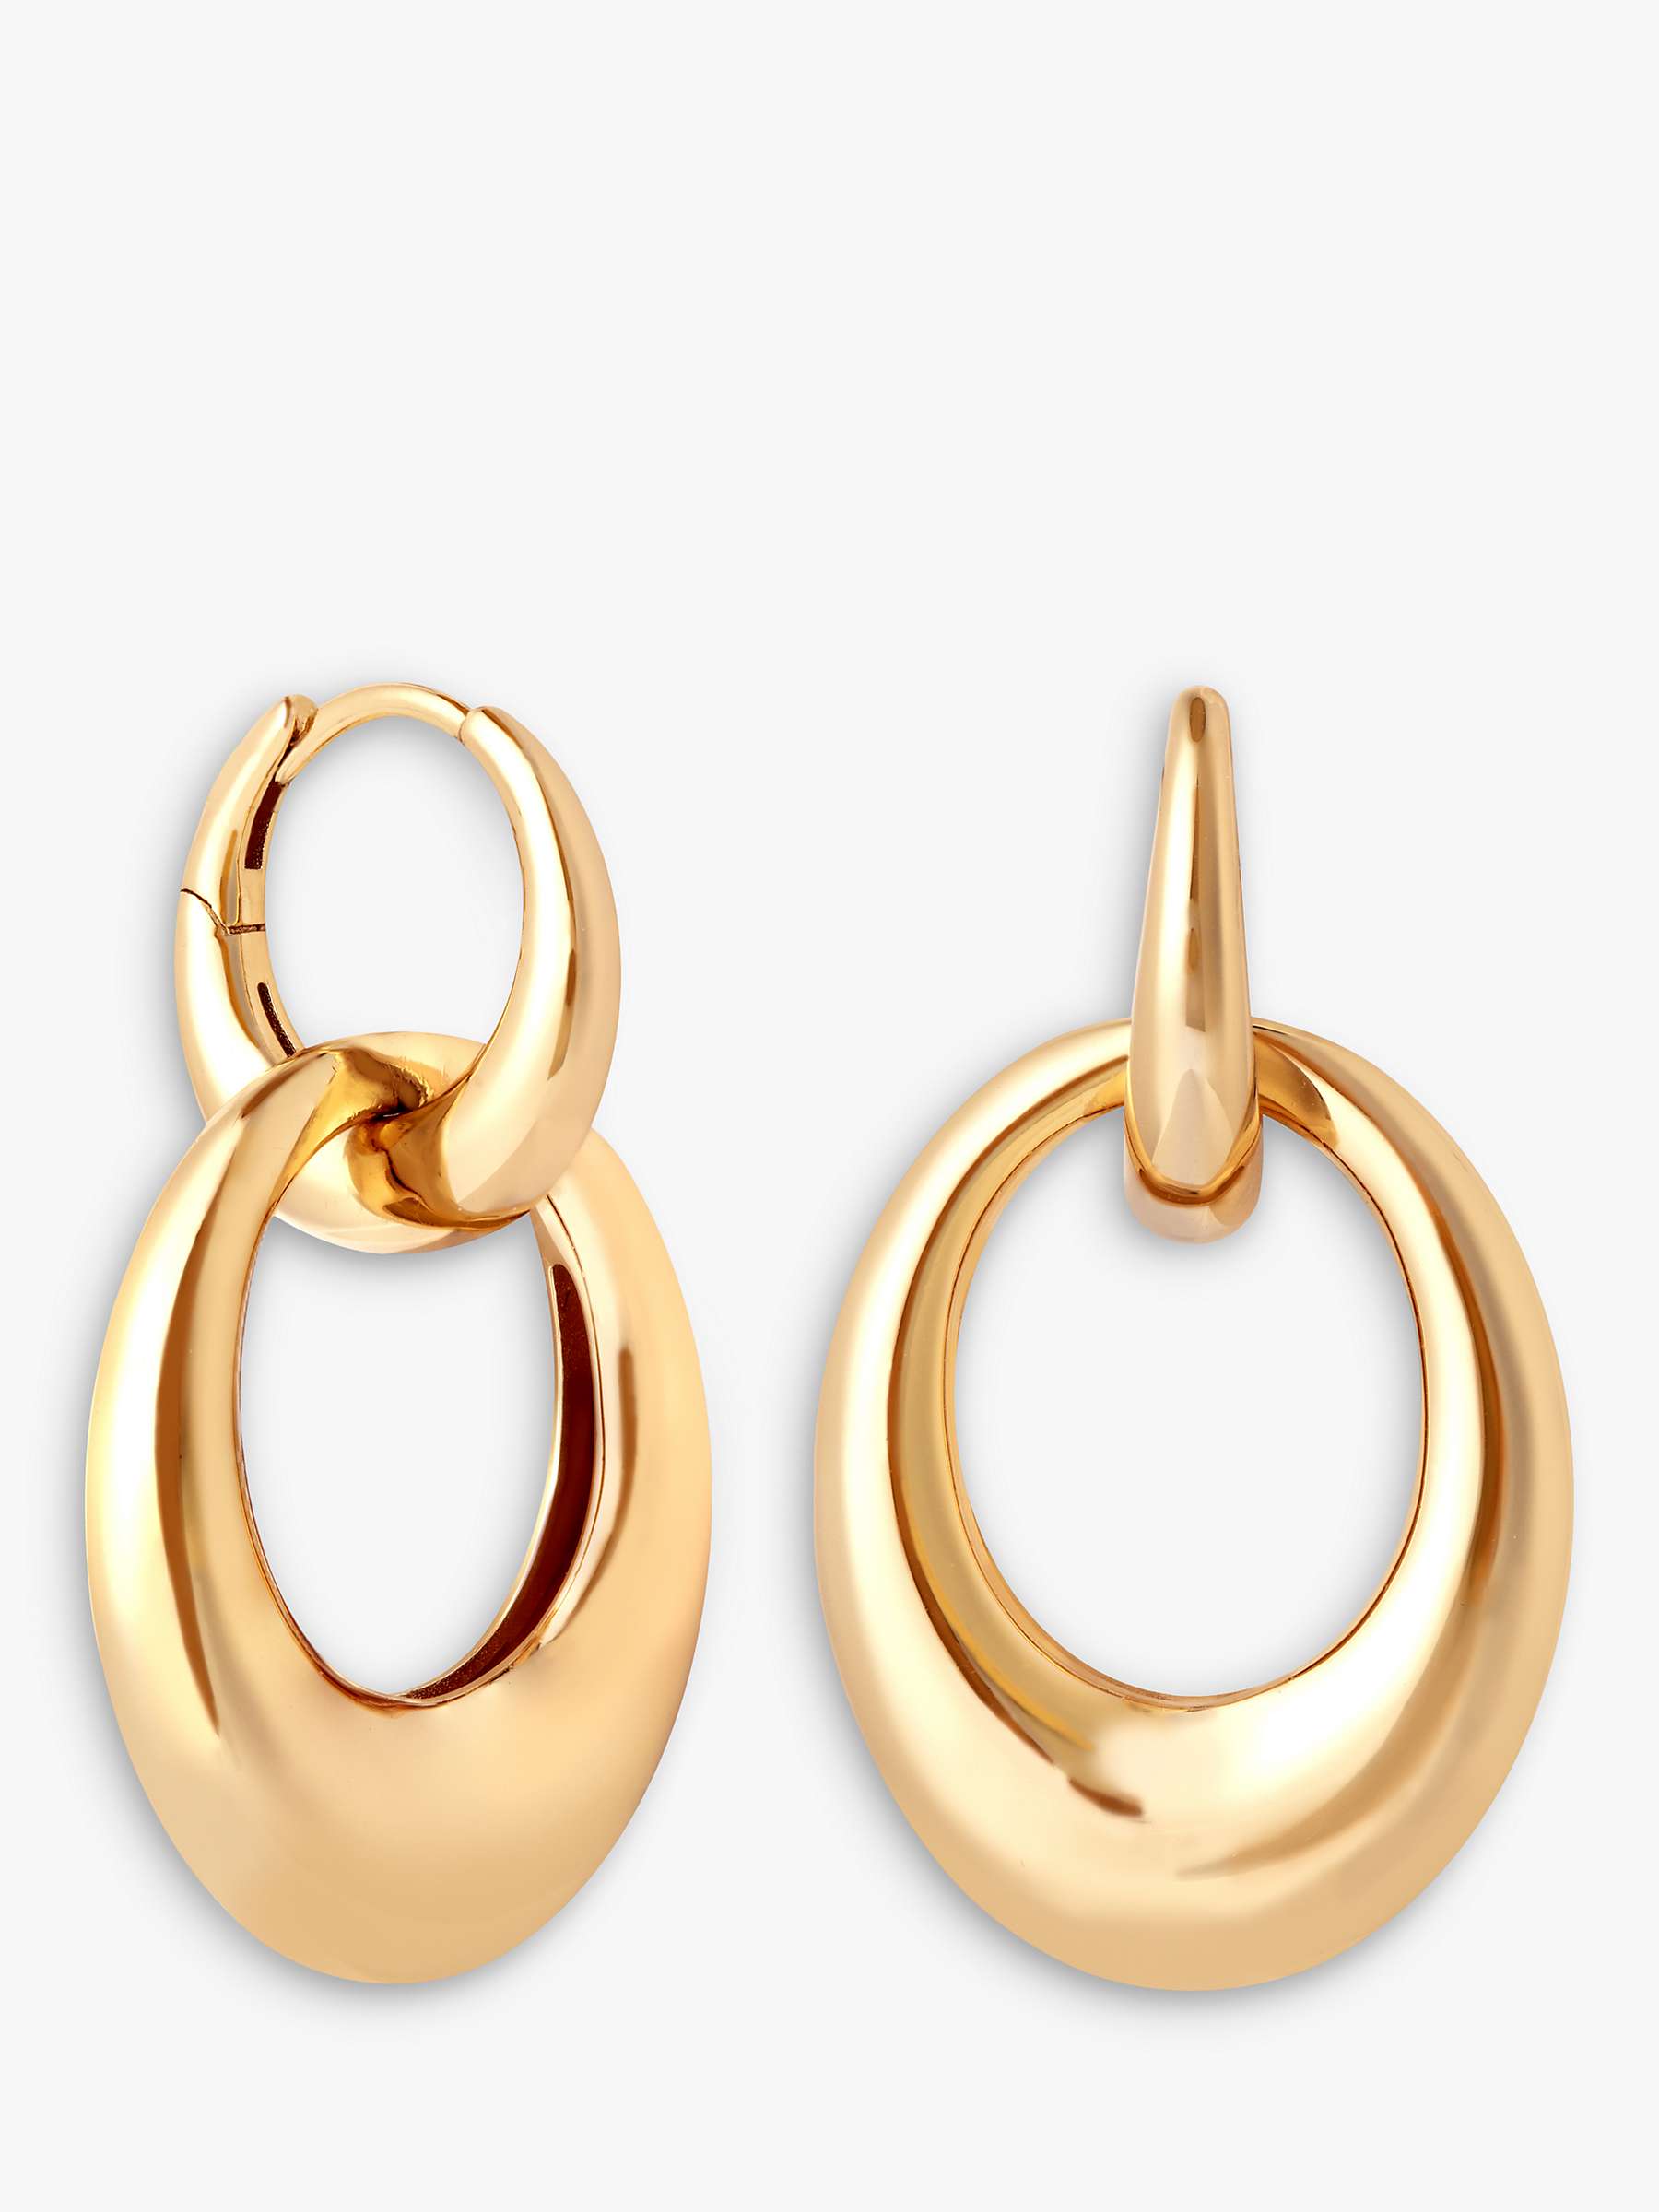 Buy Astrid & Miyu Dome Connection Link Hoop Earrings, Gold Online at johnlewis.com